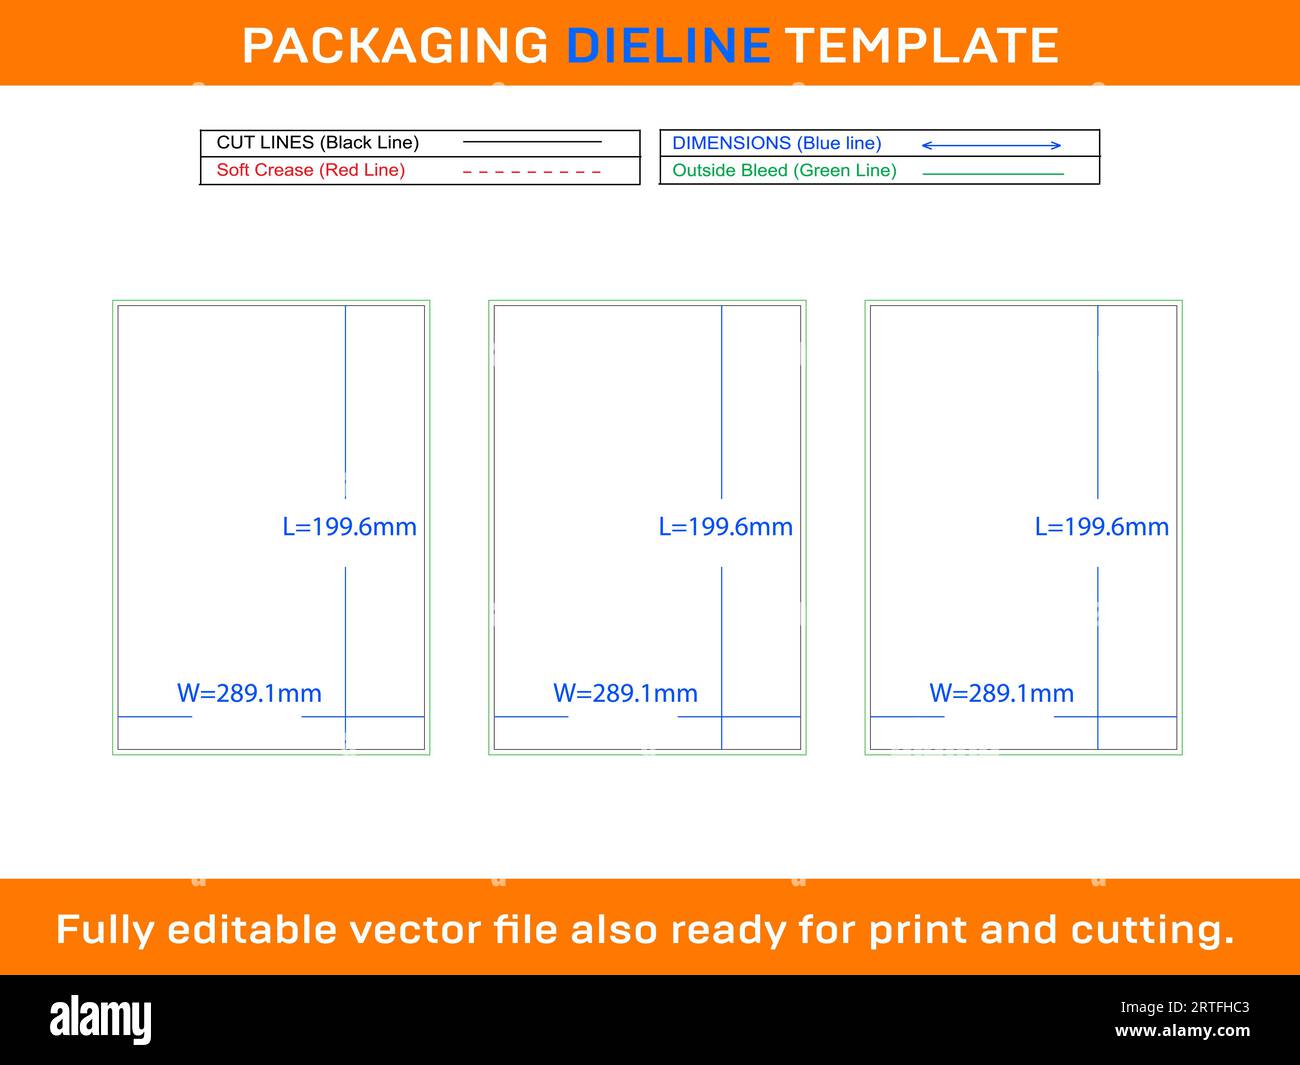 1 Adhesive Address Label Die line Template199.6 x 289.1 mm Stock Vector